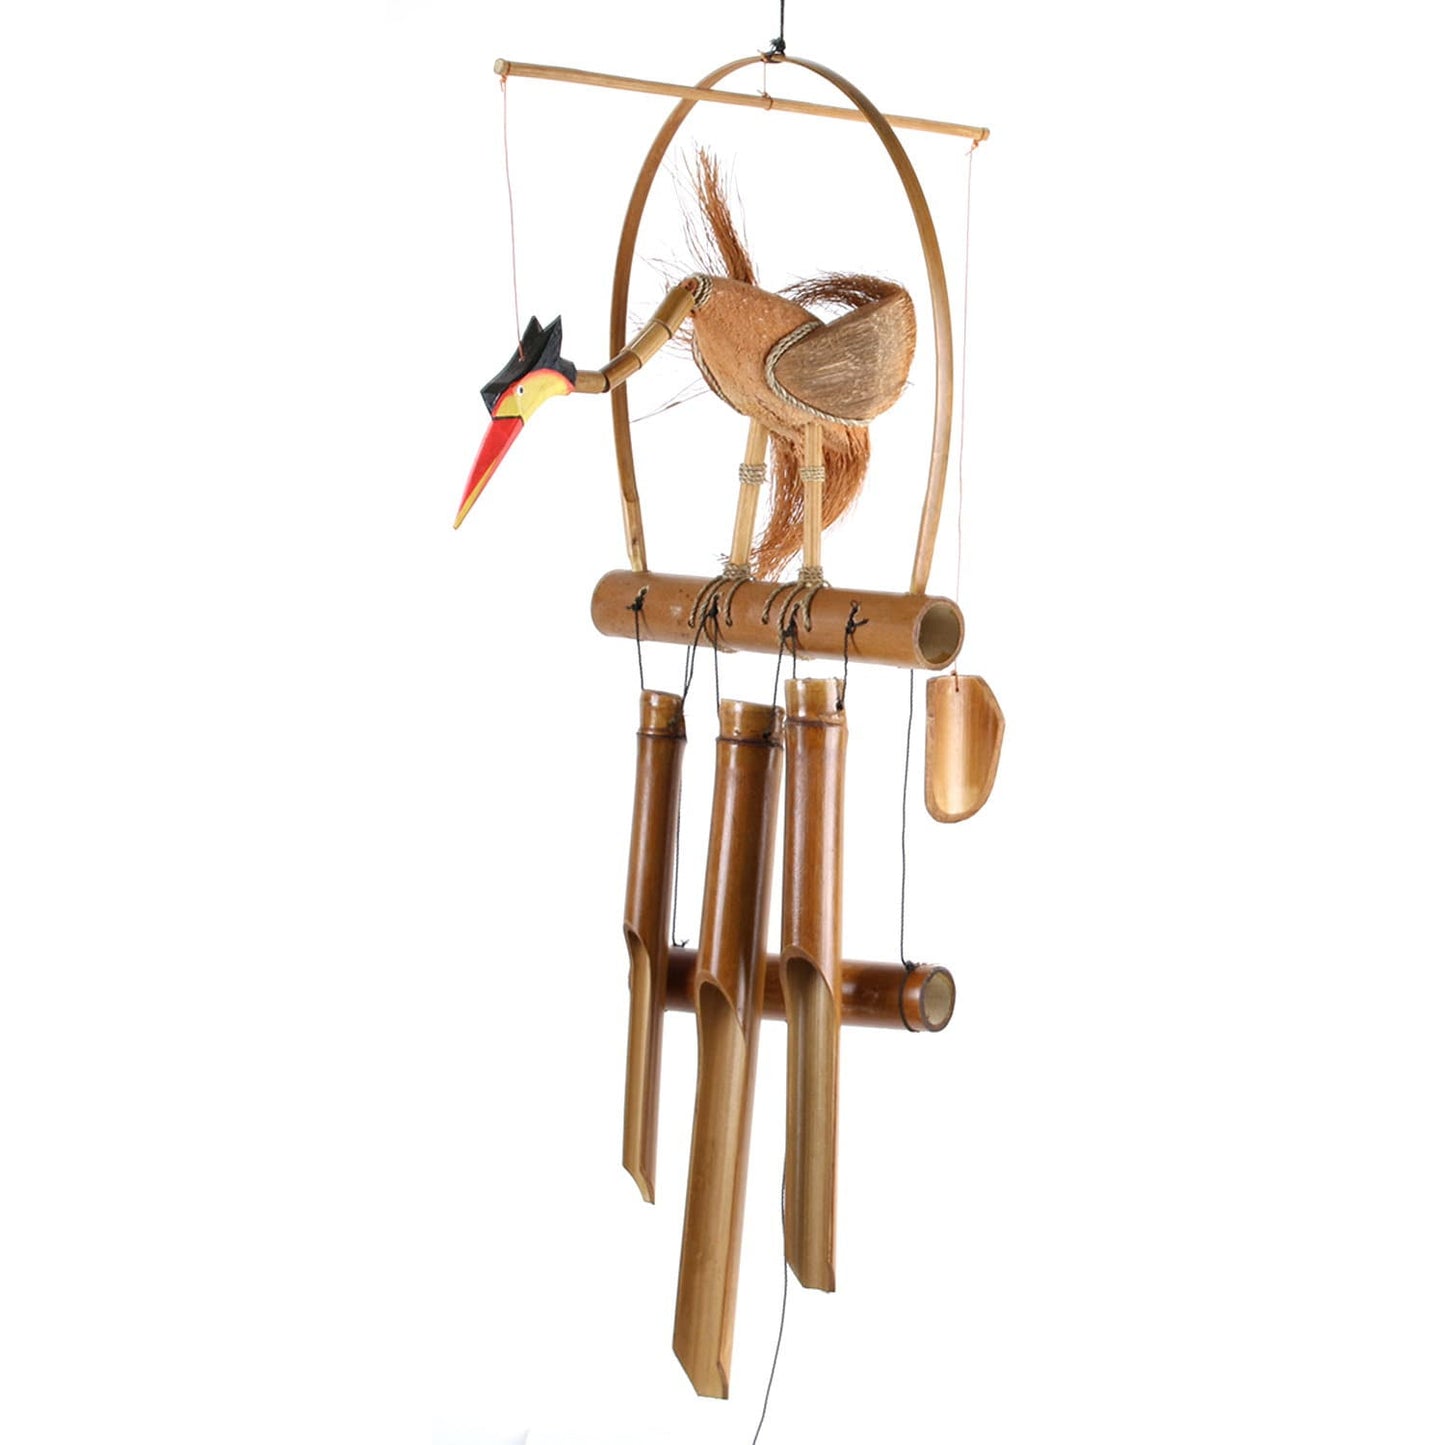 Wind chime mobile chime outdoor indoor paradise bird made of coconut and bamboo